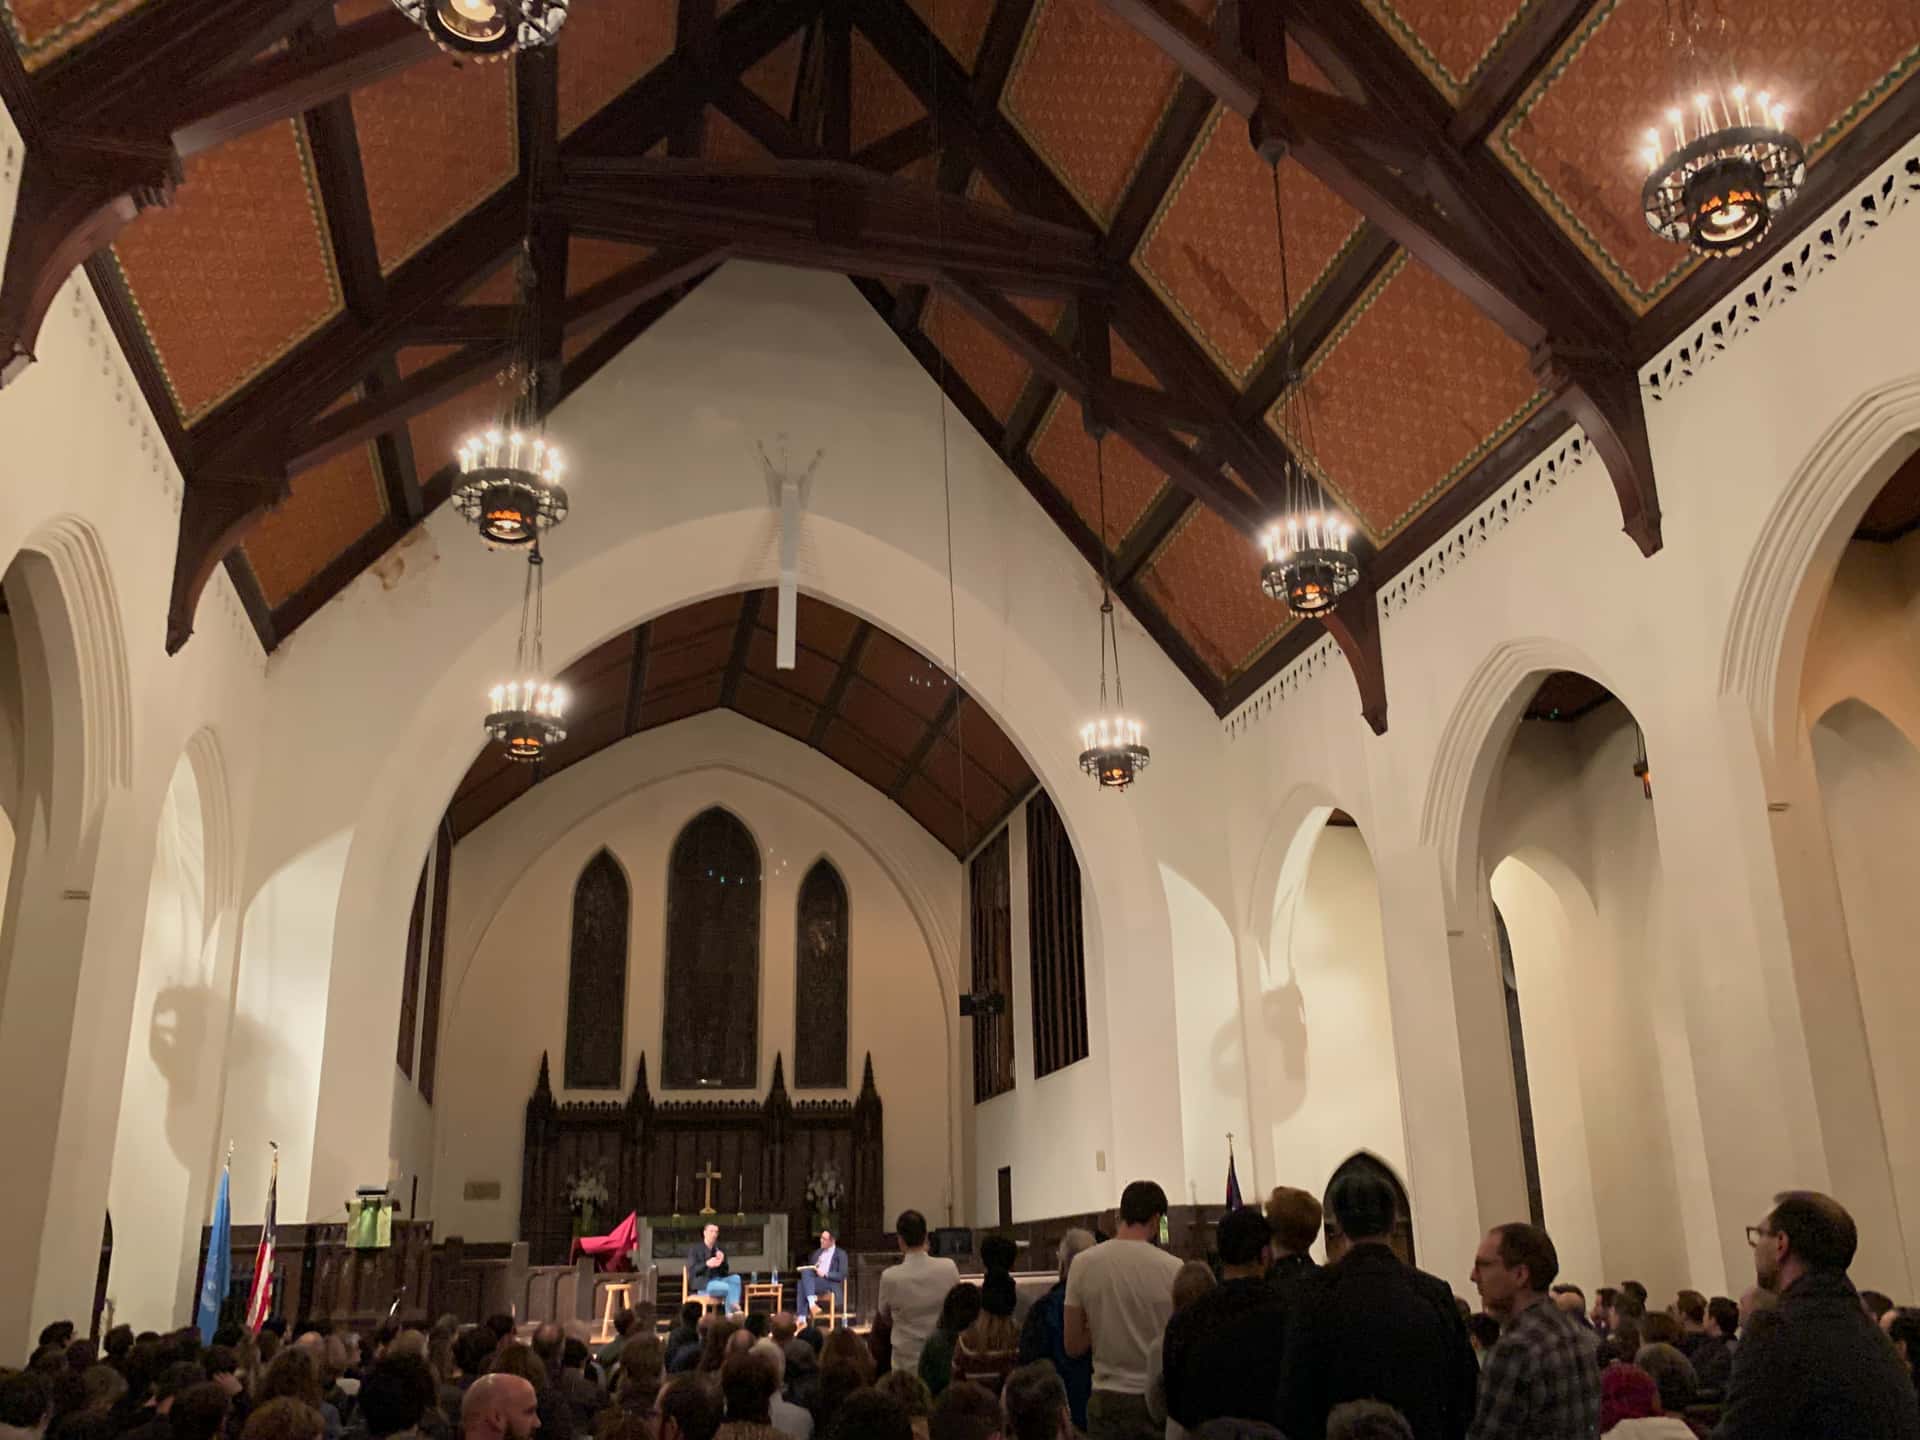 Ezra Klein and Zaki Hamid take audience questions at the front of a crowded church